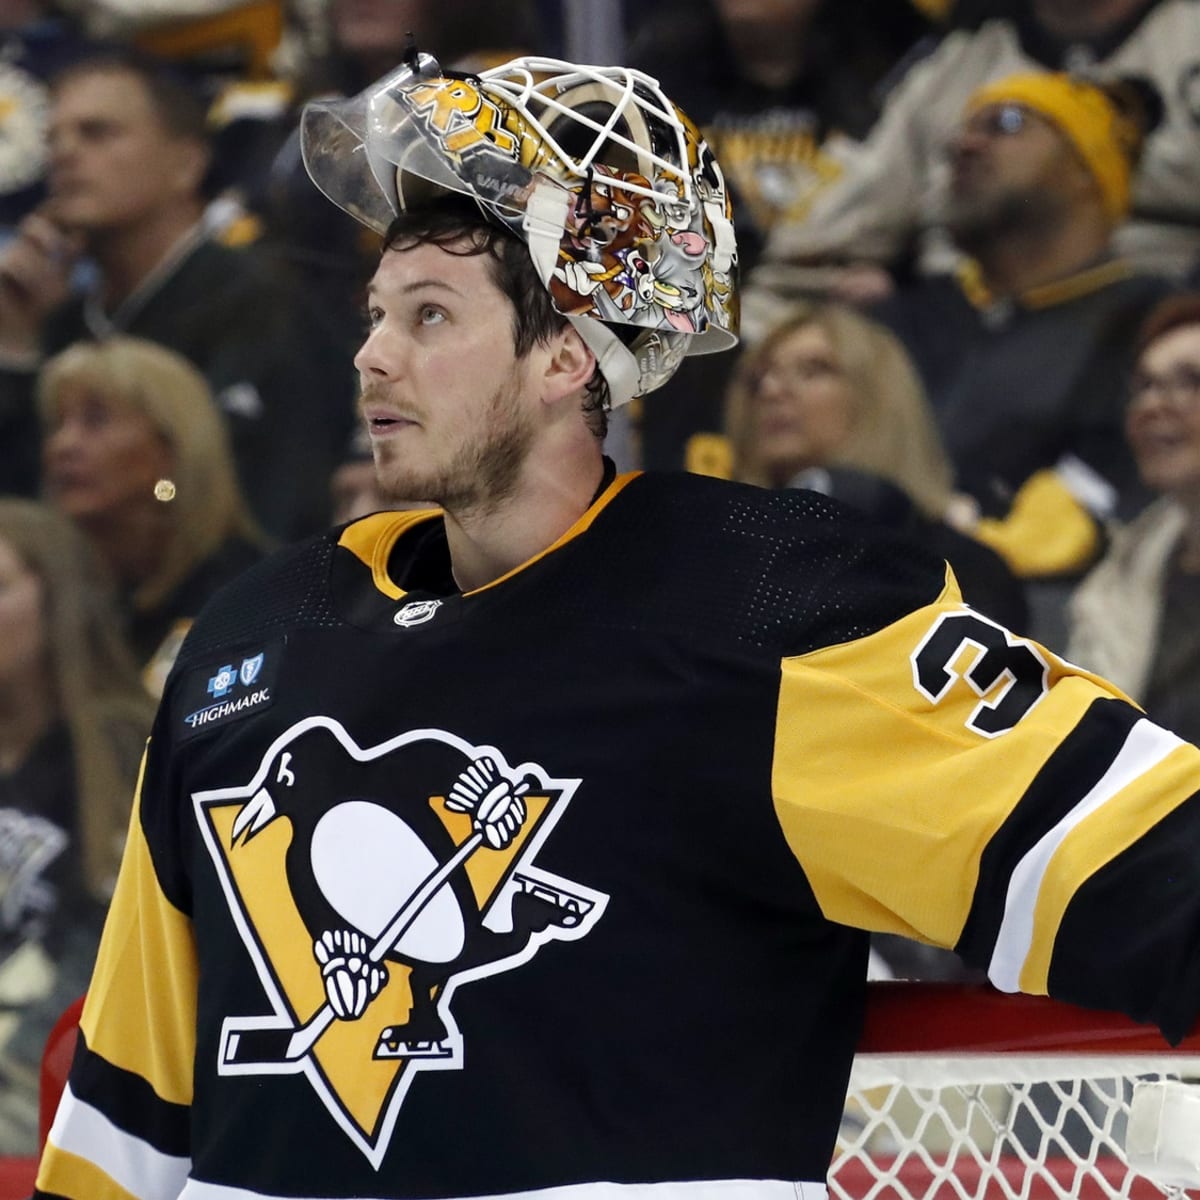 Sizing Up Potential Penguins Trade Partners: 4 Teams With Cap Space